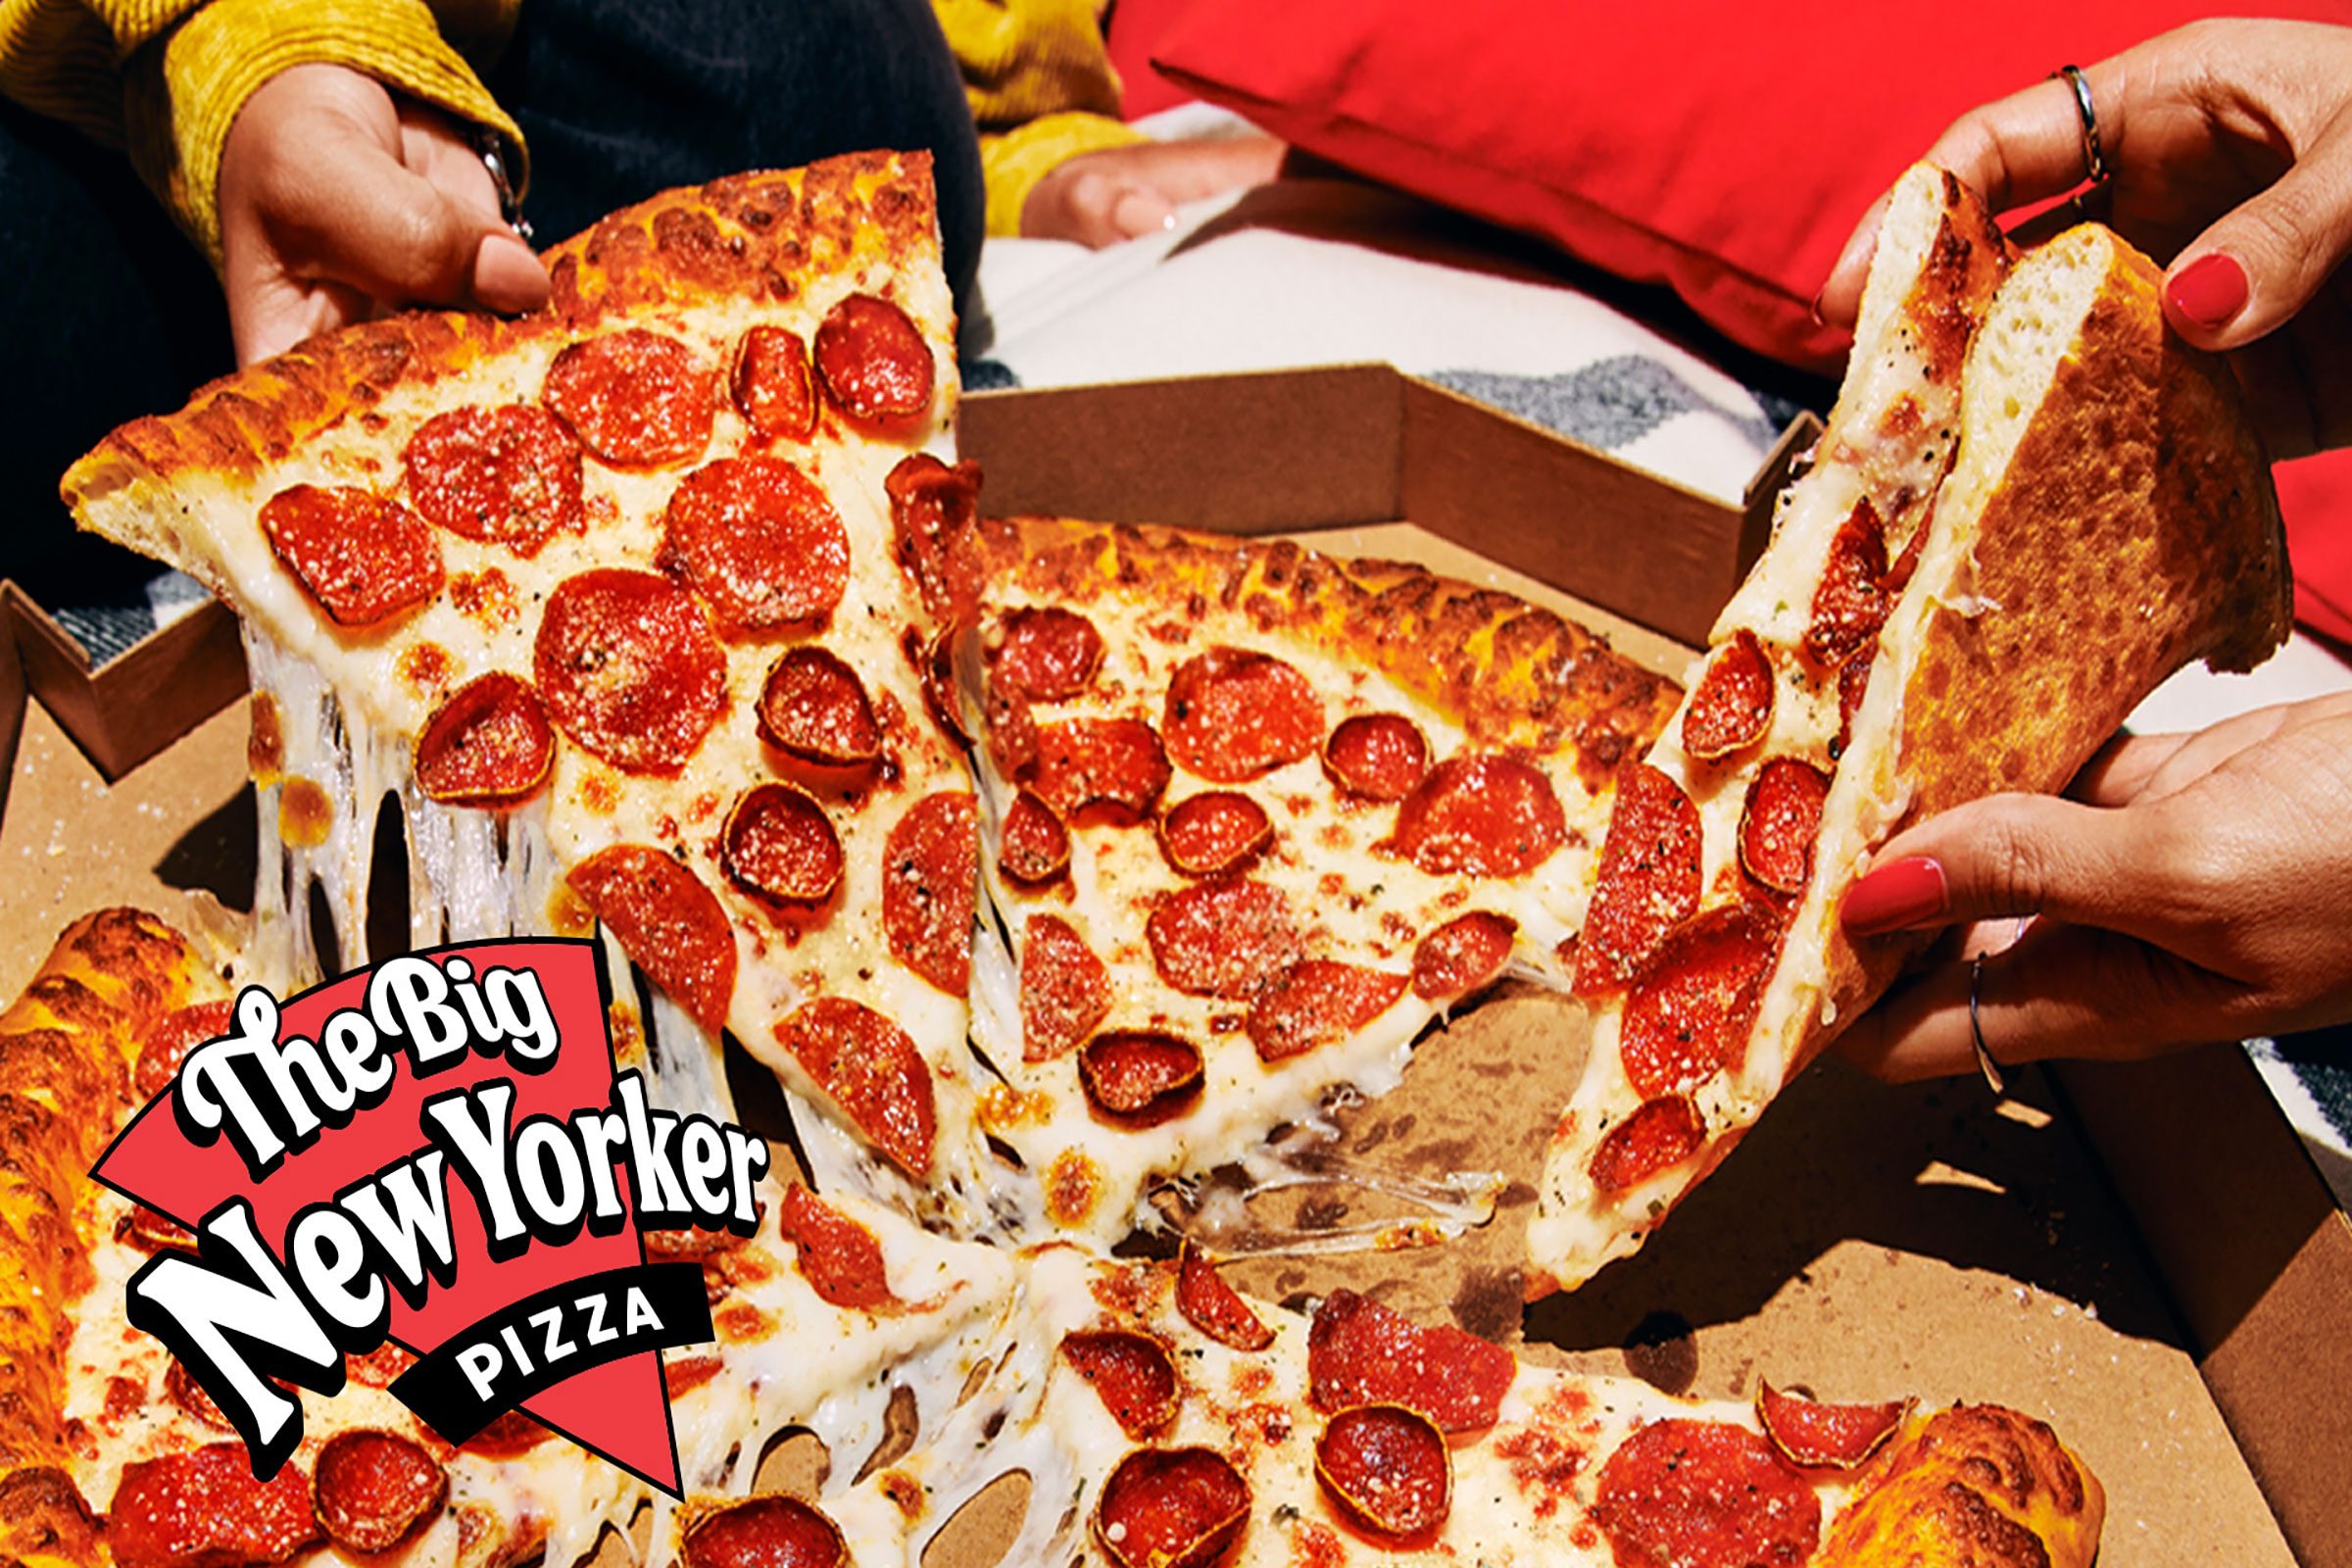 Pizza Hut's Big New Yorker Is Officially Coming Back Taste of Home